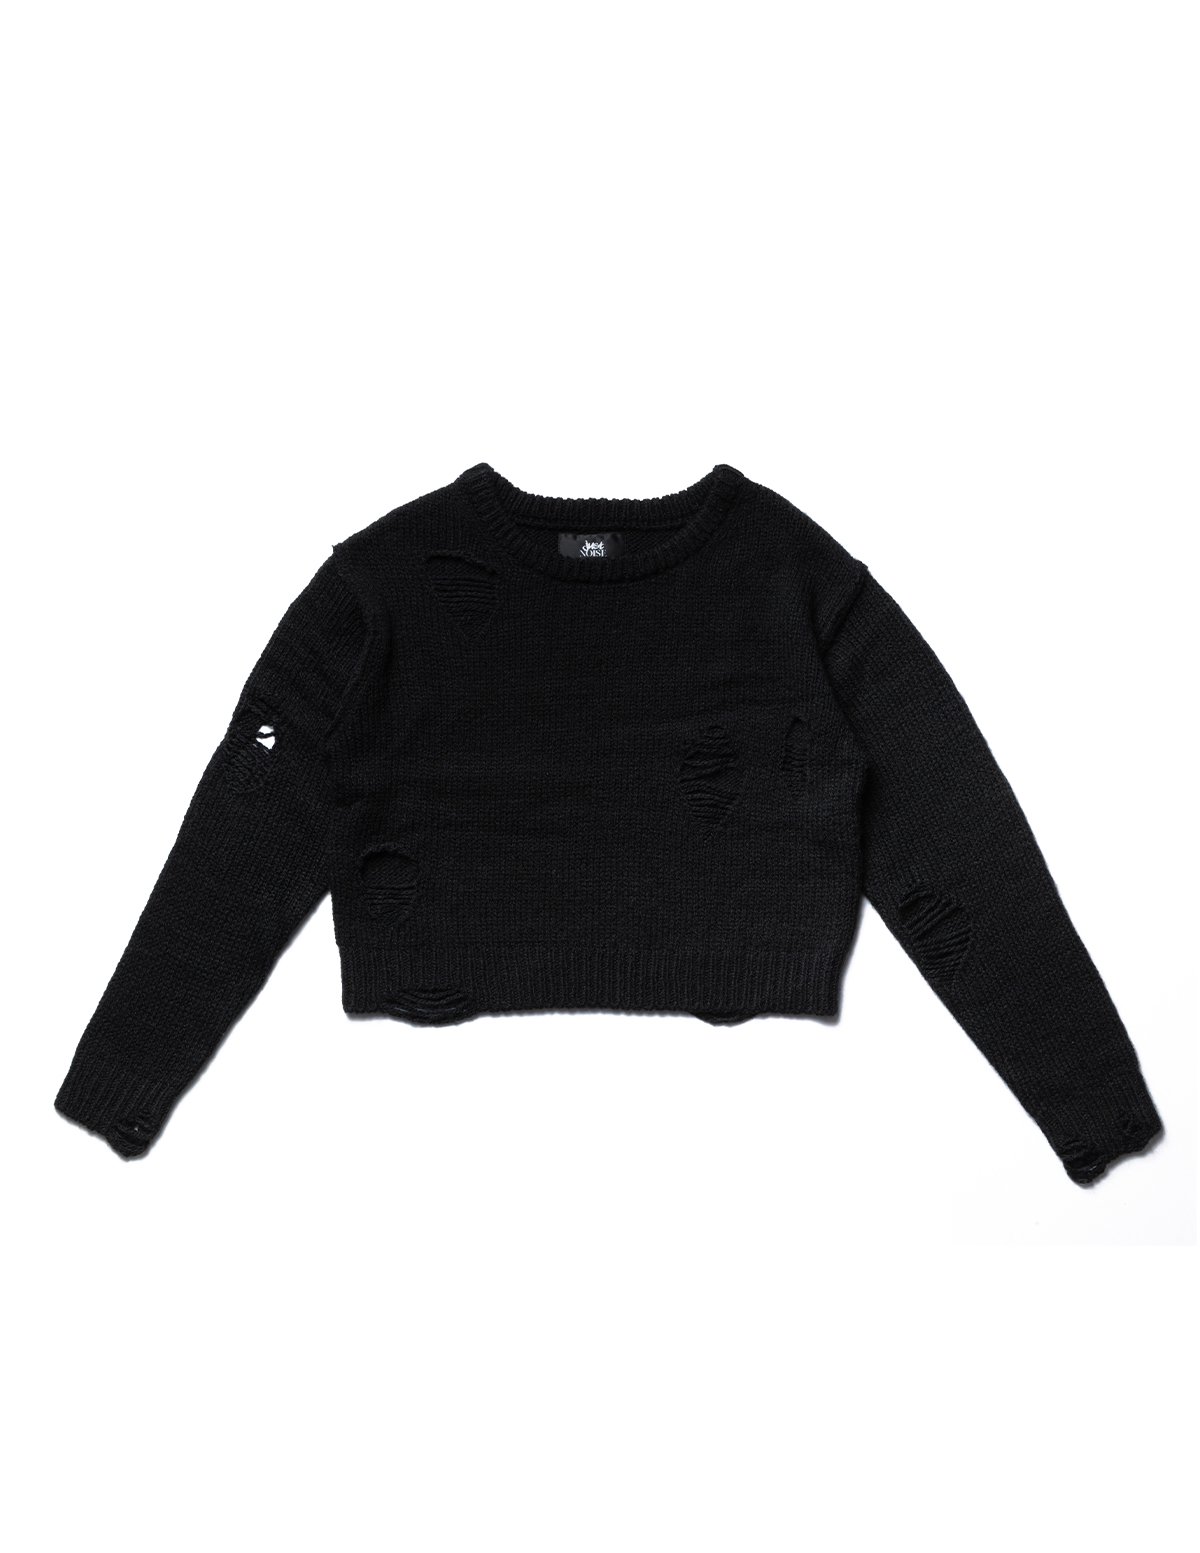 CROPPED SWEATER  - BLACK